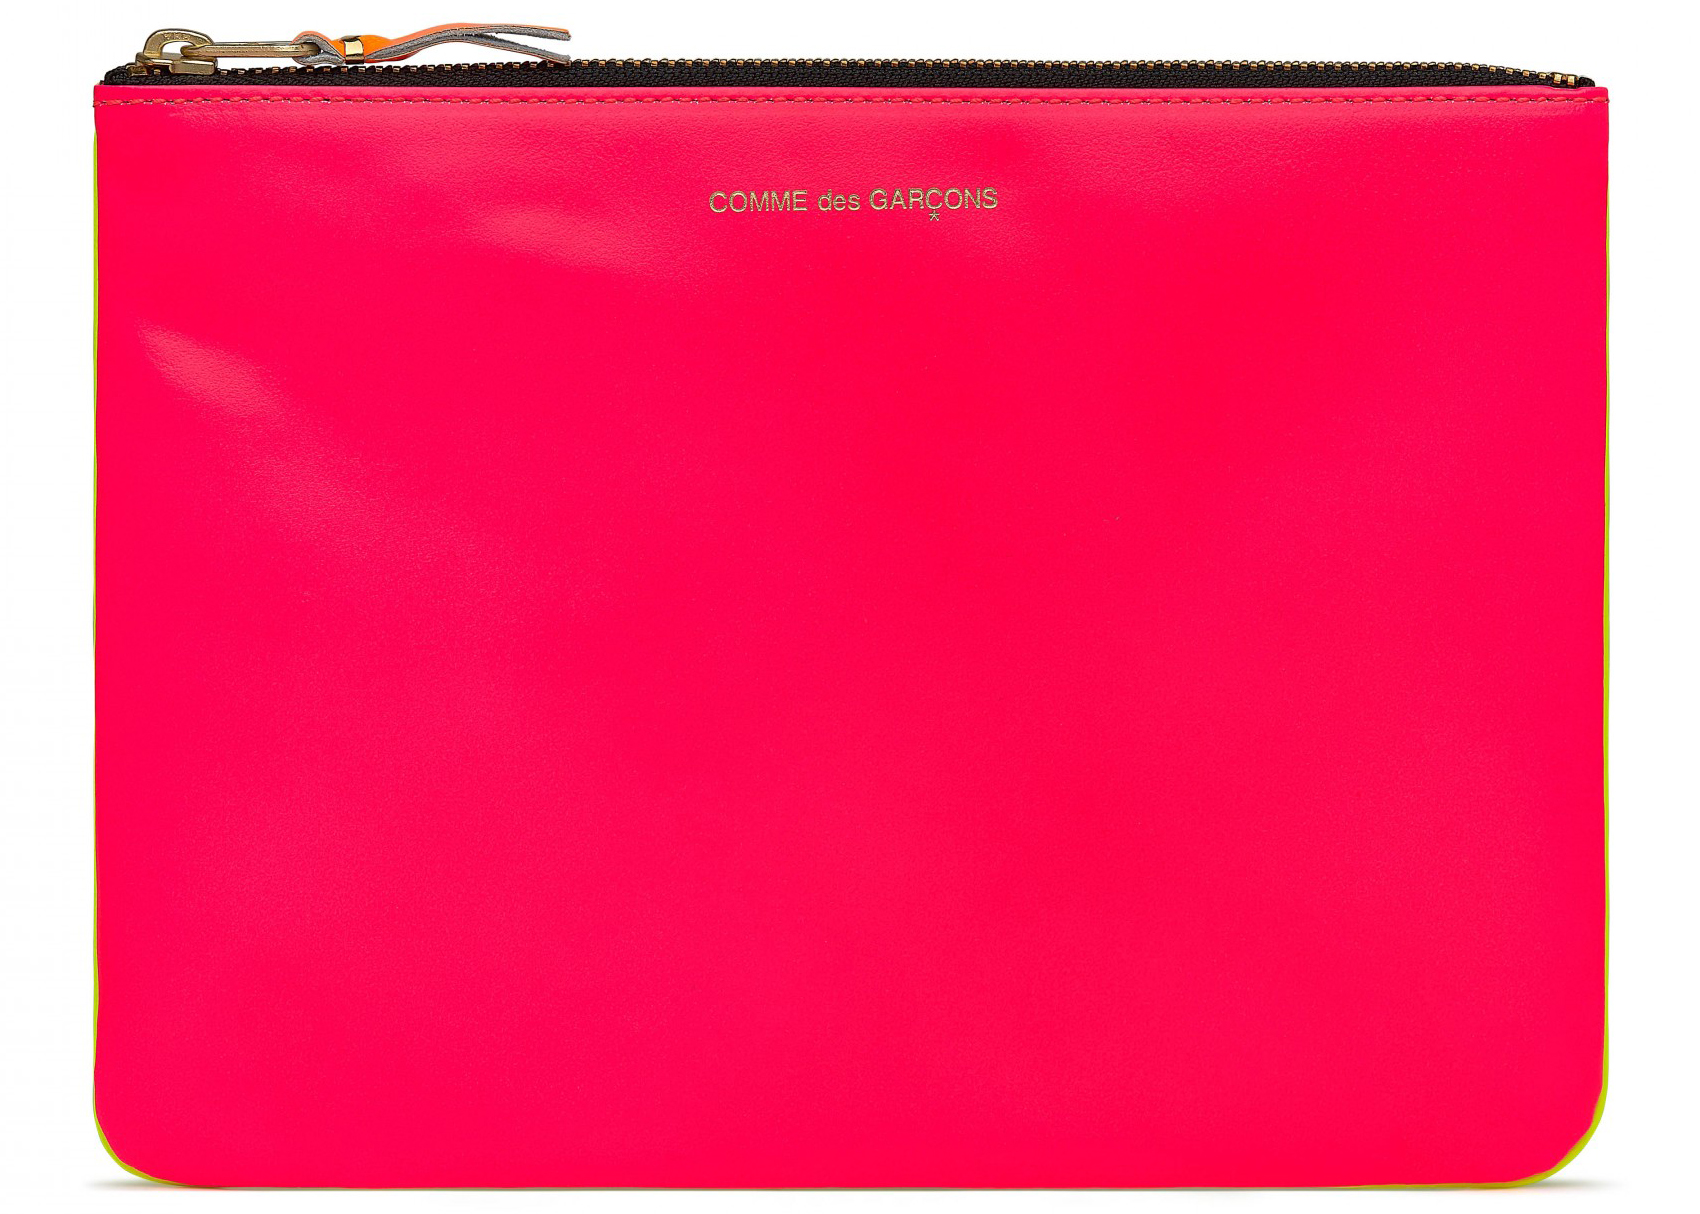 Comme des Garcons SA5100SF New Super Fluo Wallet Pink/Yellow in